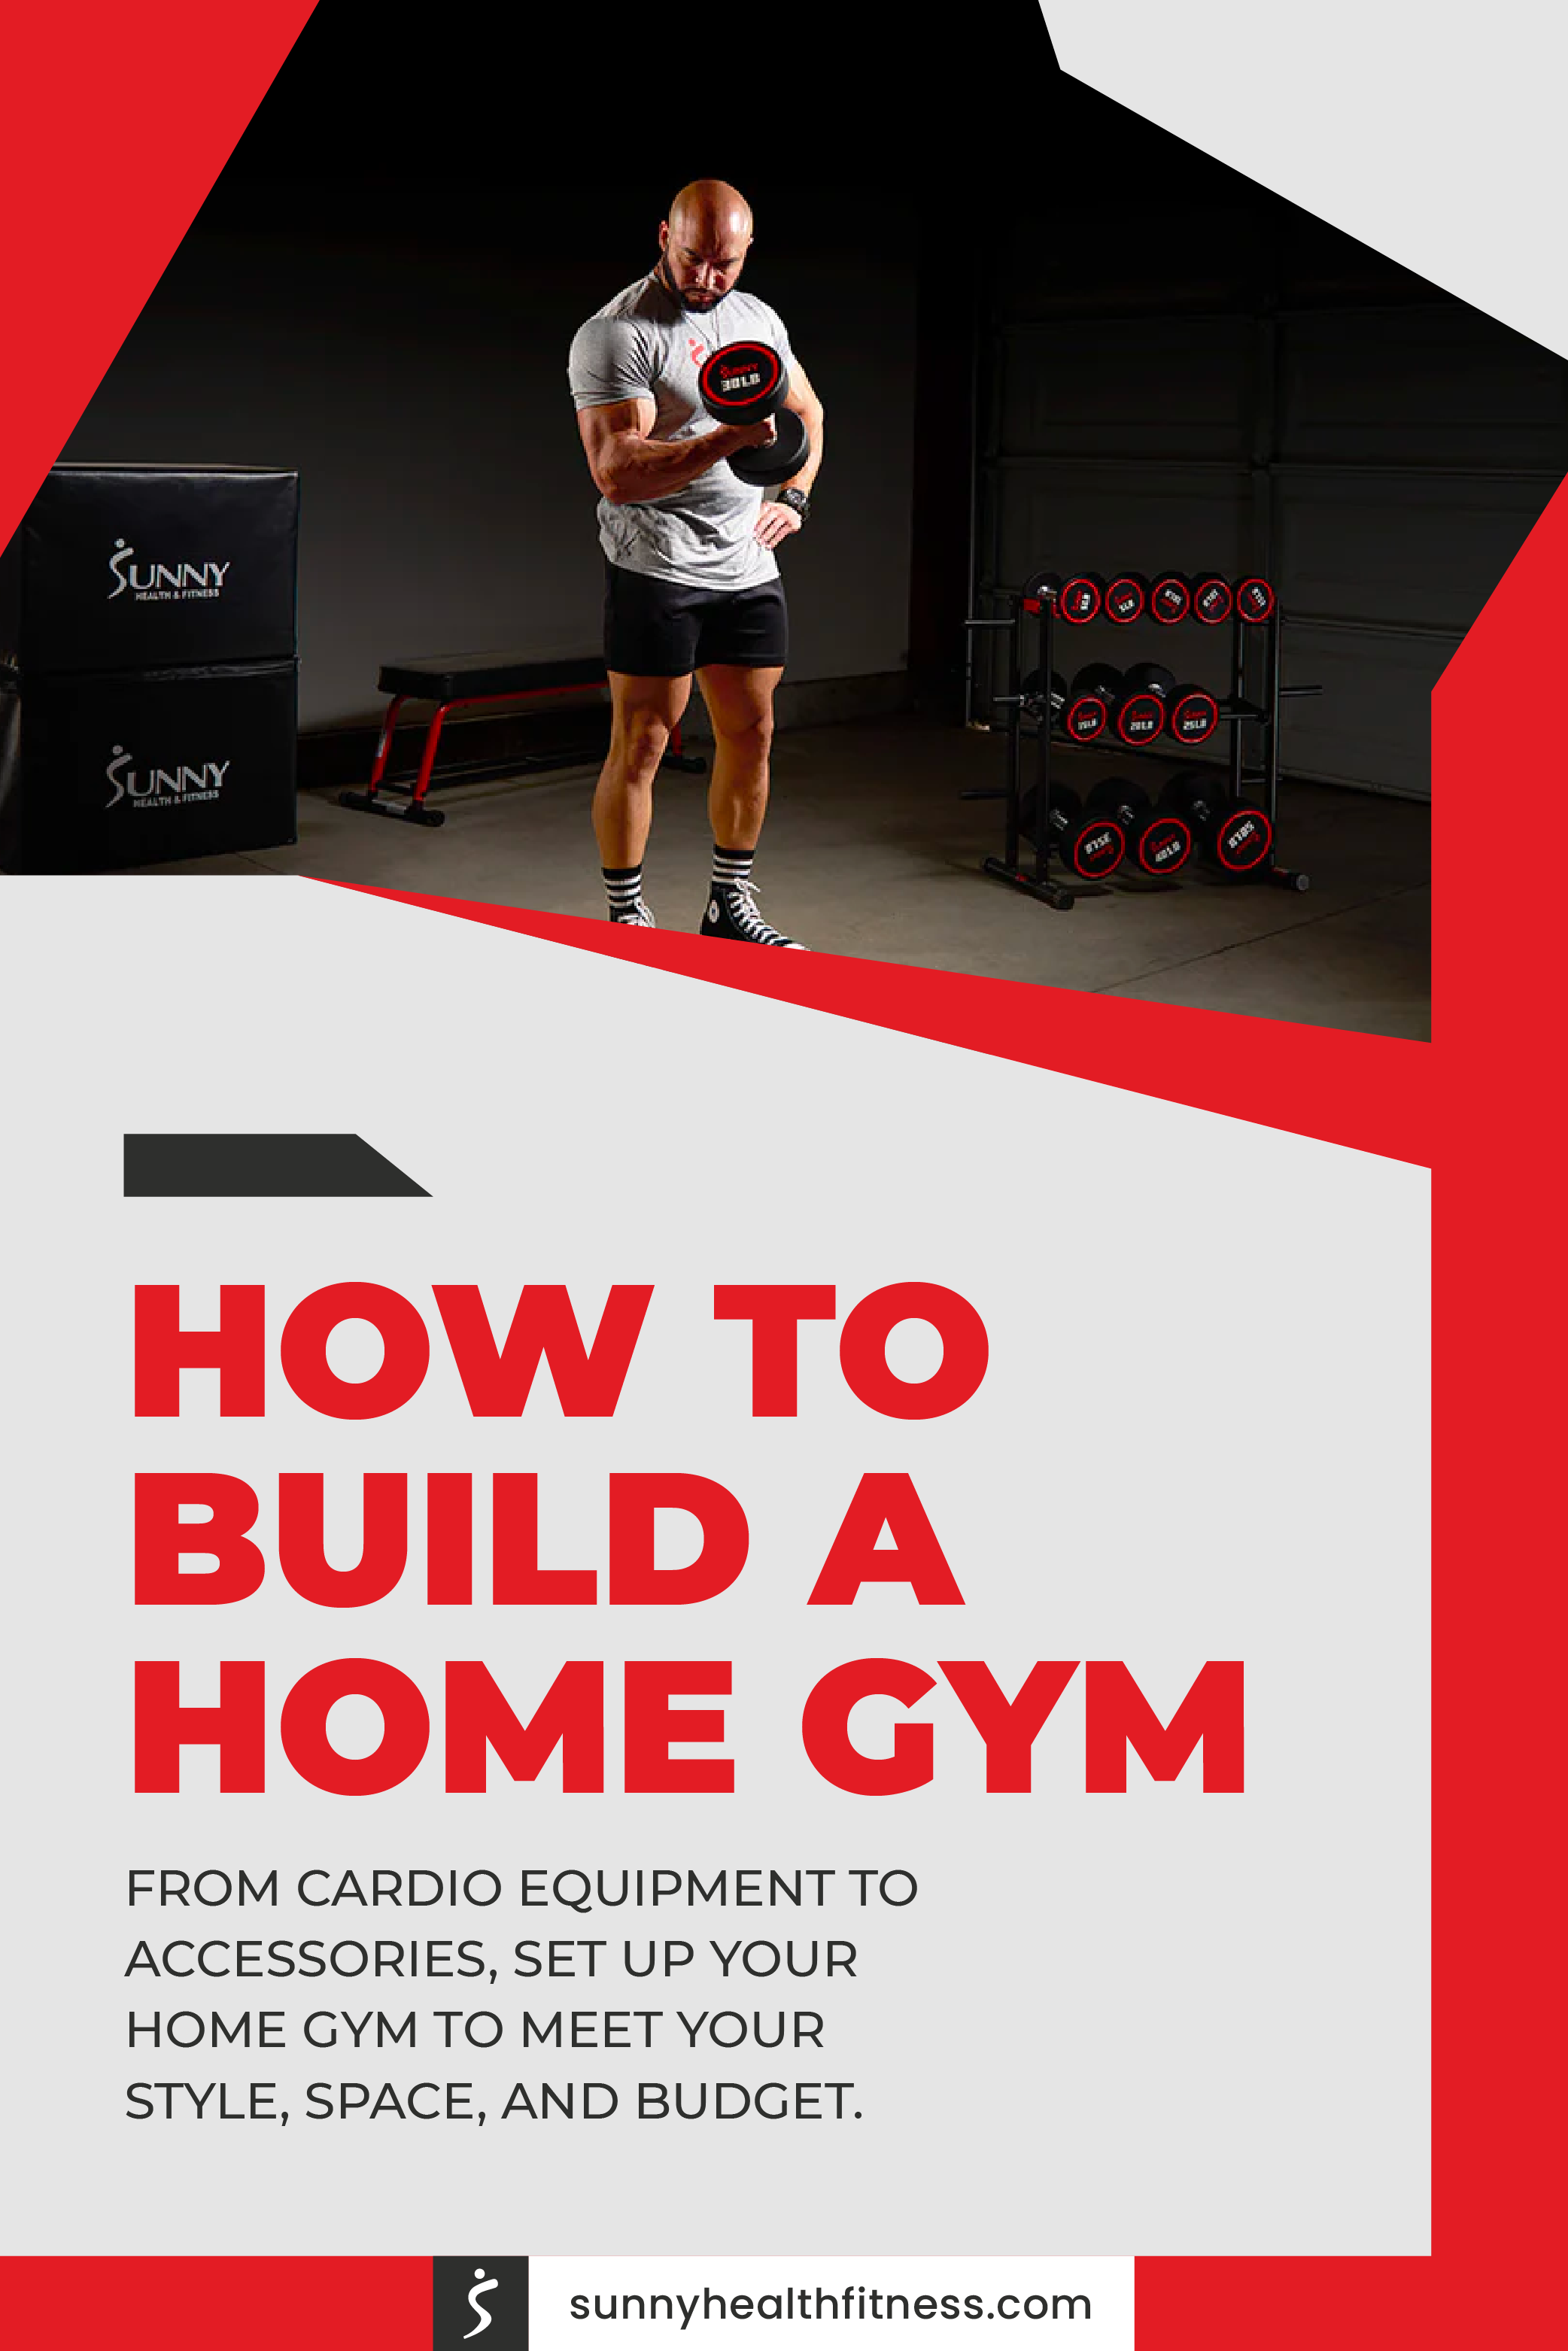 How to Build A Home Gym Infographic